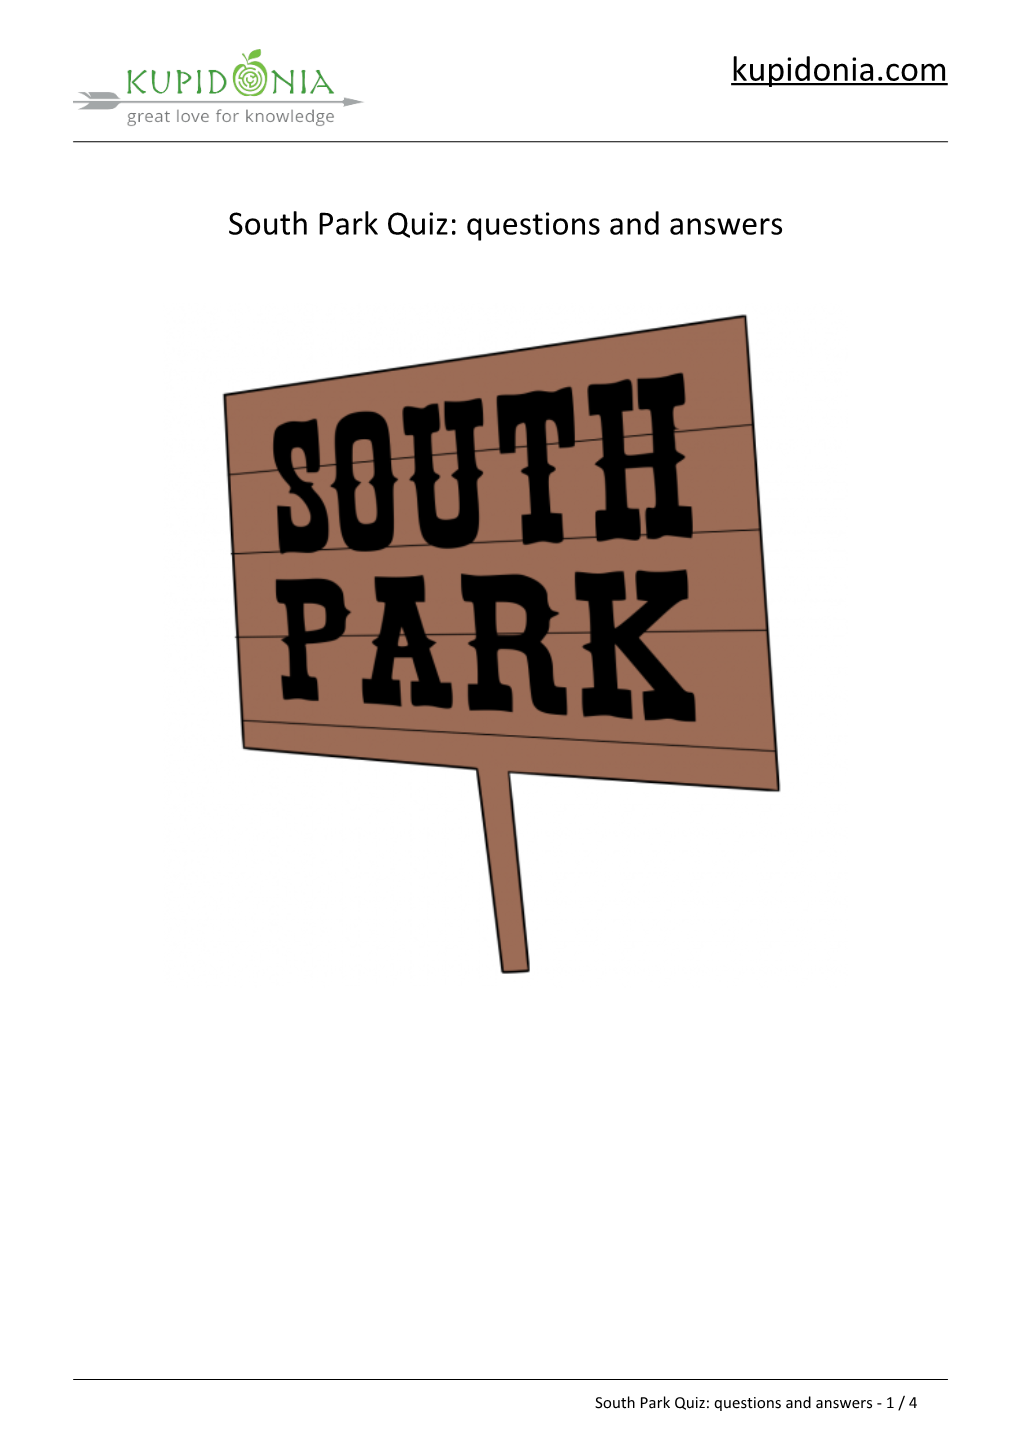 South Park Quiz: Questions and Answers